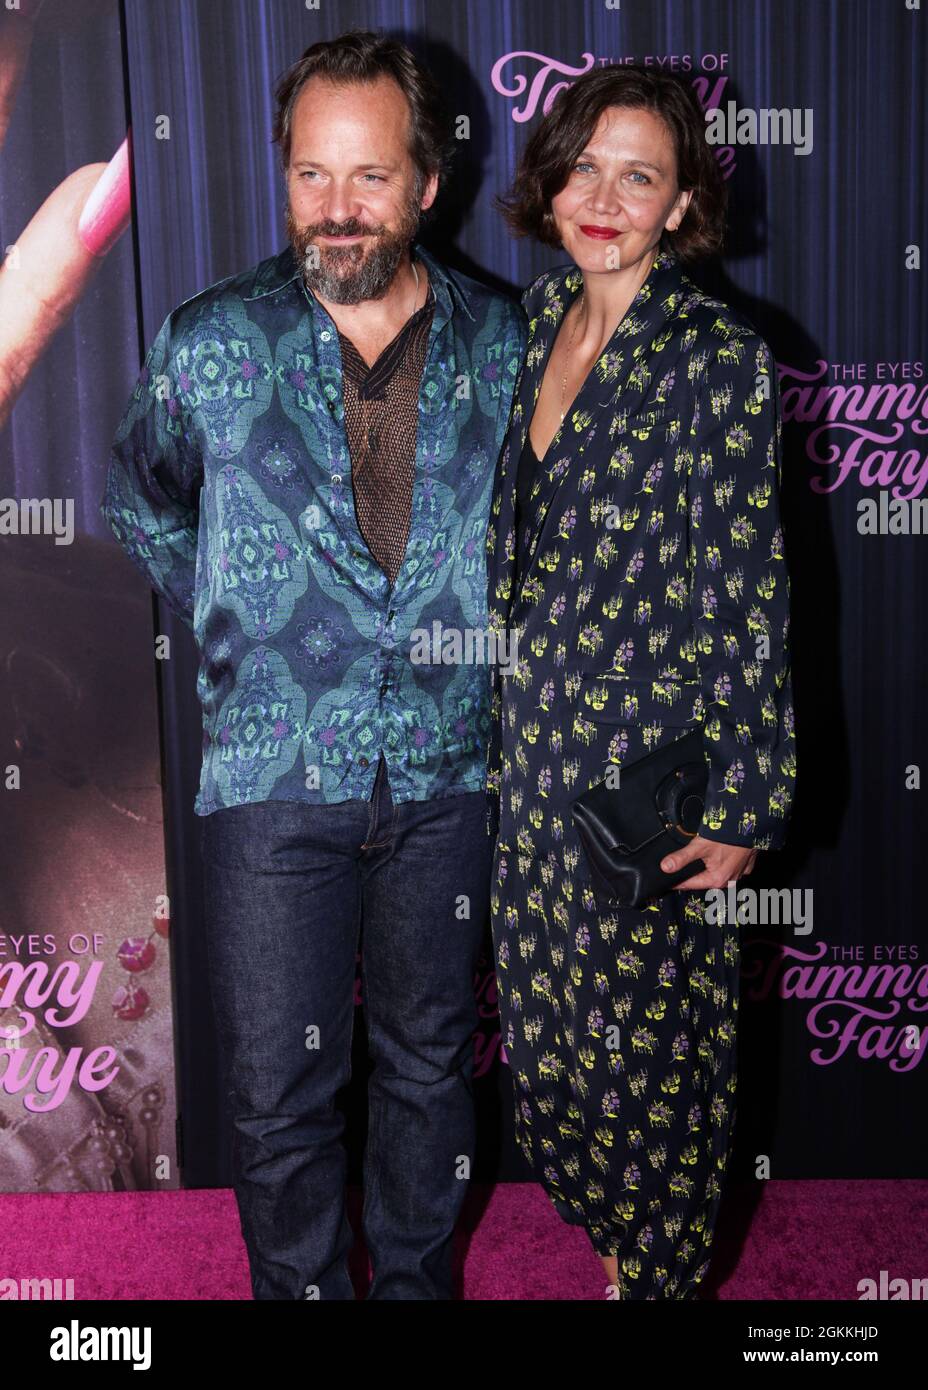 New York City, United States. 14th Sep, 2021. MANHATTAN, NEW YORK CITY, NEW YORK, USA - SEPTEMBER 14: Peter Sarsgaard and wife/actress Maggie Gyllenhaal arrive at the New York Premiere Of Fox Searchlight Pictures' 'The Eyes Of Tammy Faye' held at the SVA Theater on September 14, 2021 in Manhattan, New York City, New York, United States. (Photo by Kevin Lian/Image Press Agency/Sipa USA) Credit: Sipa USA/Alamy Live News Stock Photo